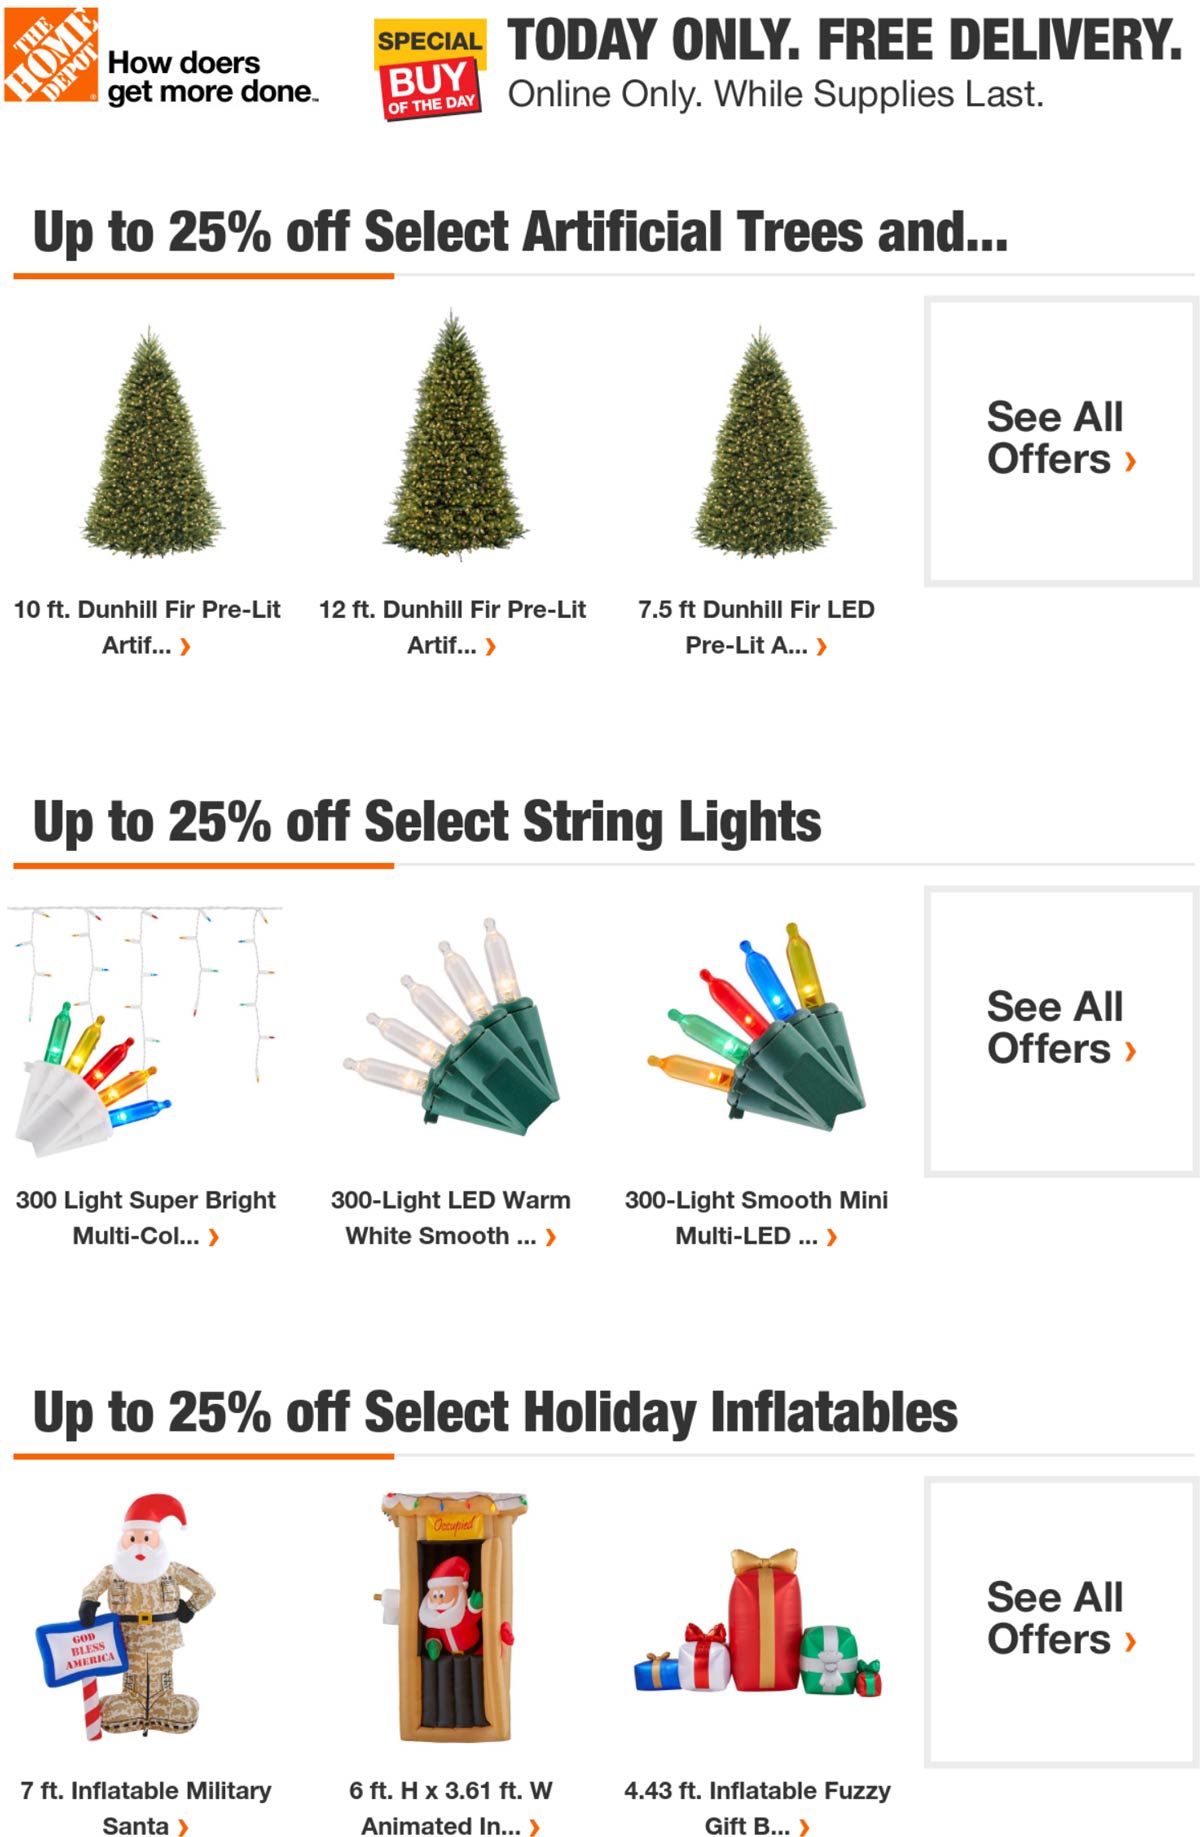 Home Depot stores Coupon  Free delivery today & 25% off holiday decorations at Home Depot #homedepot 